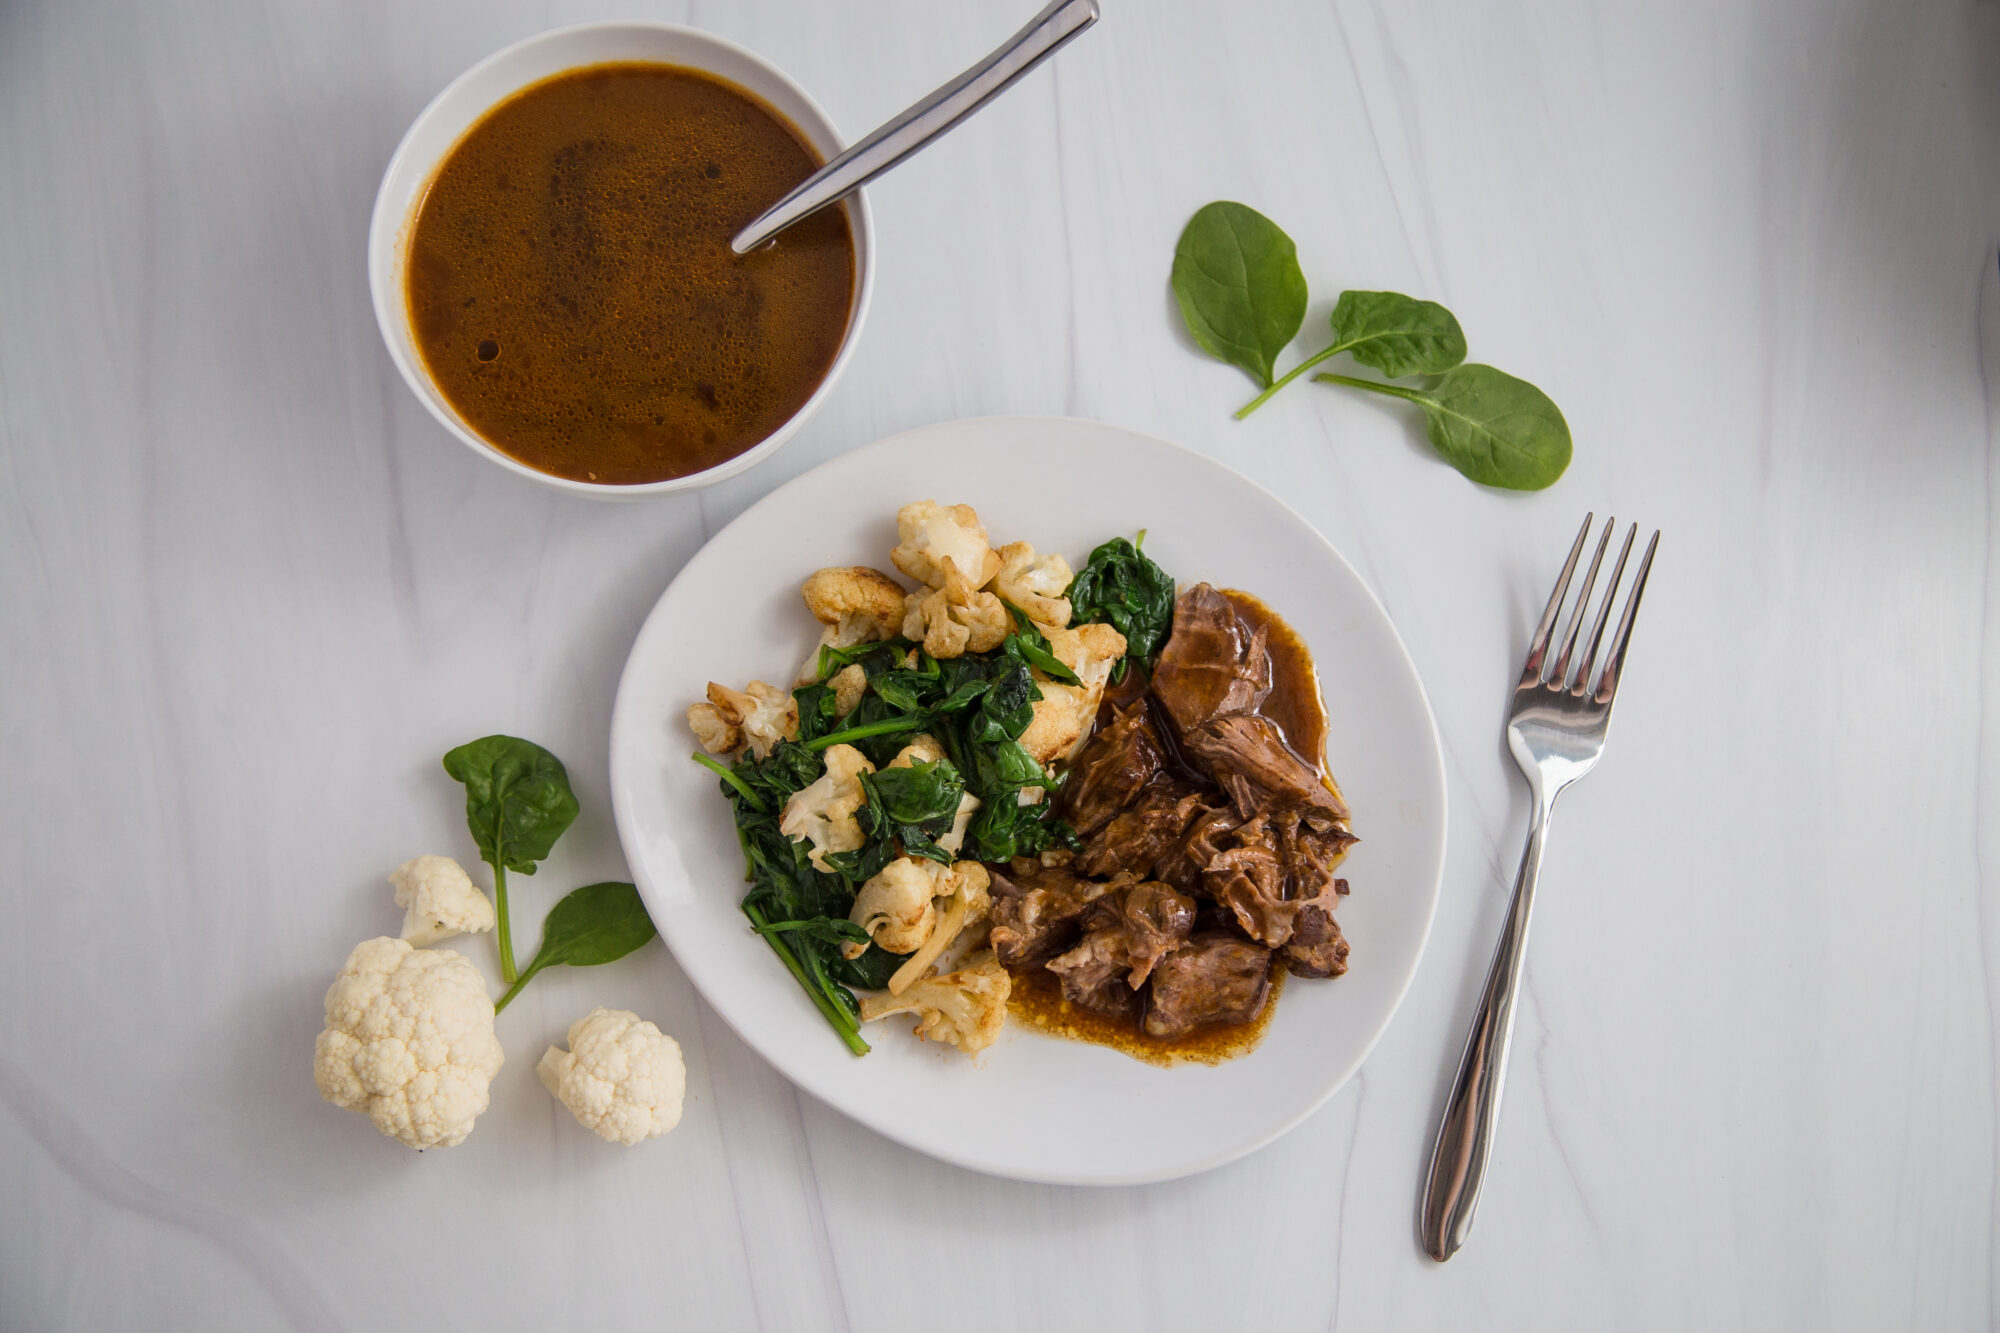 Top view-white plate with braised chuck roast in gravy, cauliflower and cooked spinach. On the table; a cup with gravy, spinach leaves and a fork.